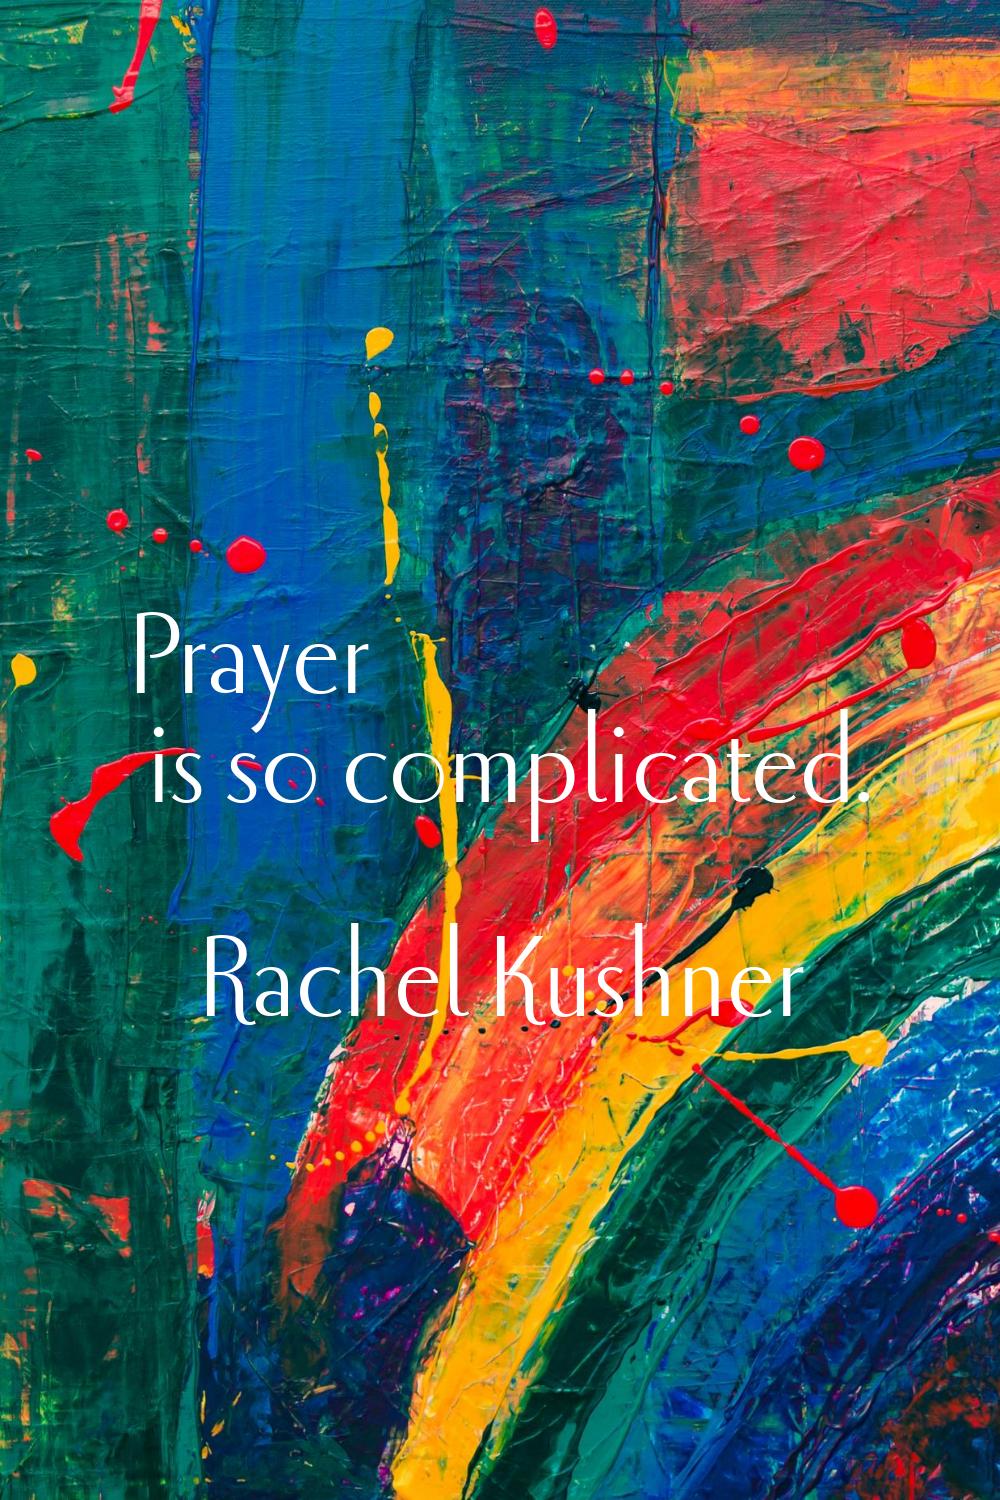 Prayer is so complicated.